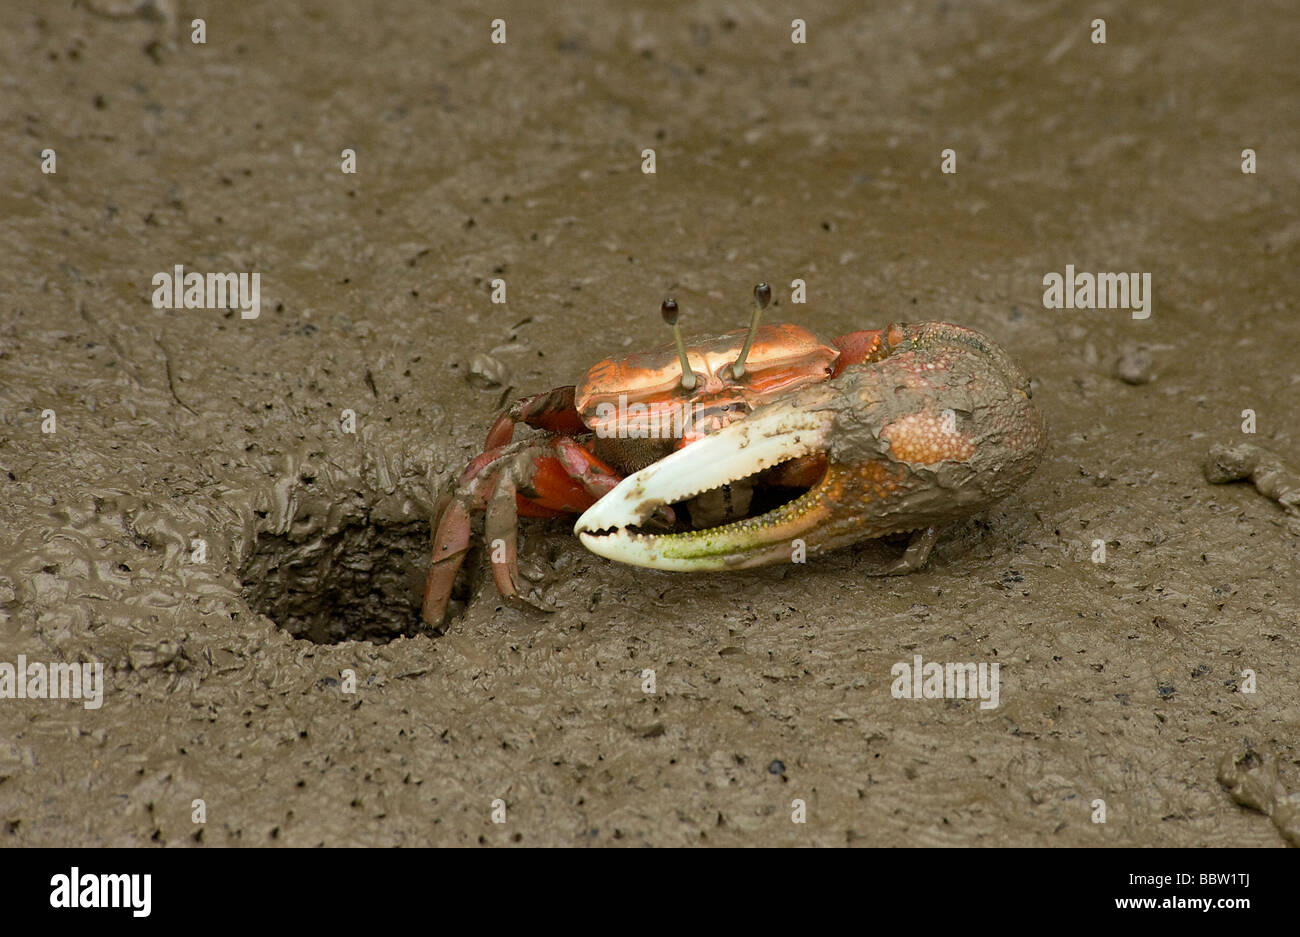 Male fiddler crab emerges from burrow at low tide in mangrove swamp in Mai Po Reserve Hong Kong Note large single pince and eyes Stock Photo